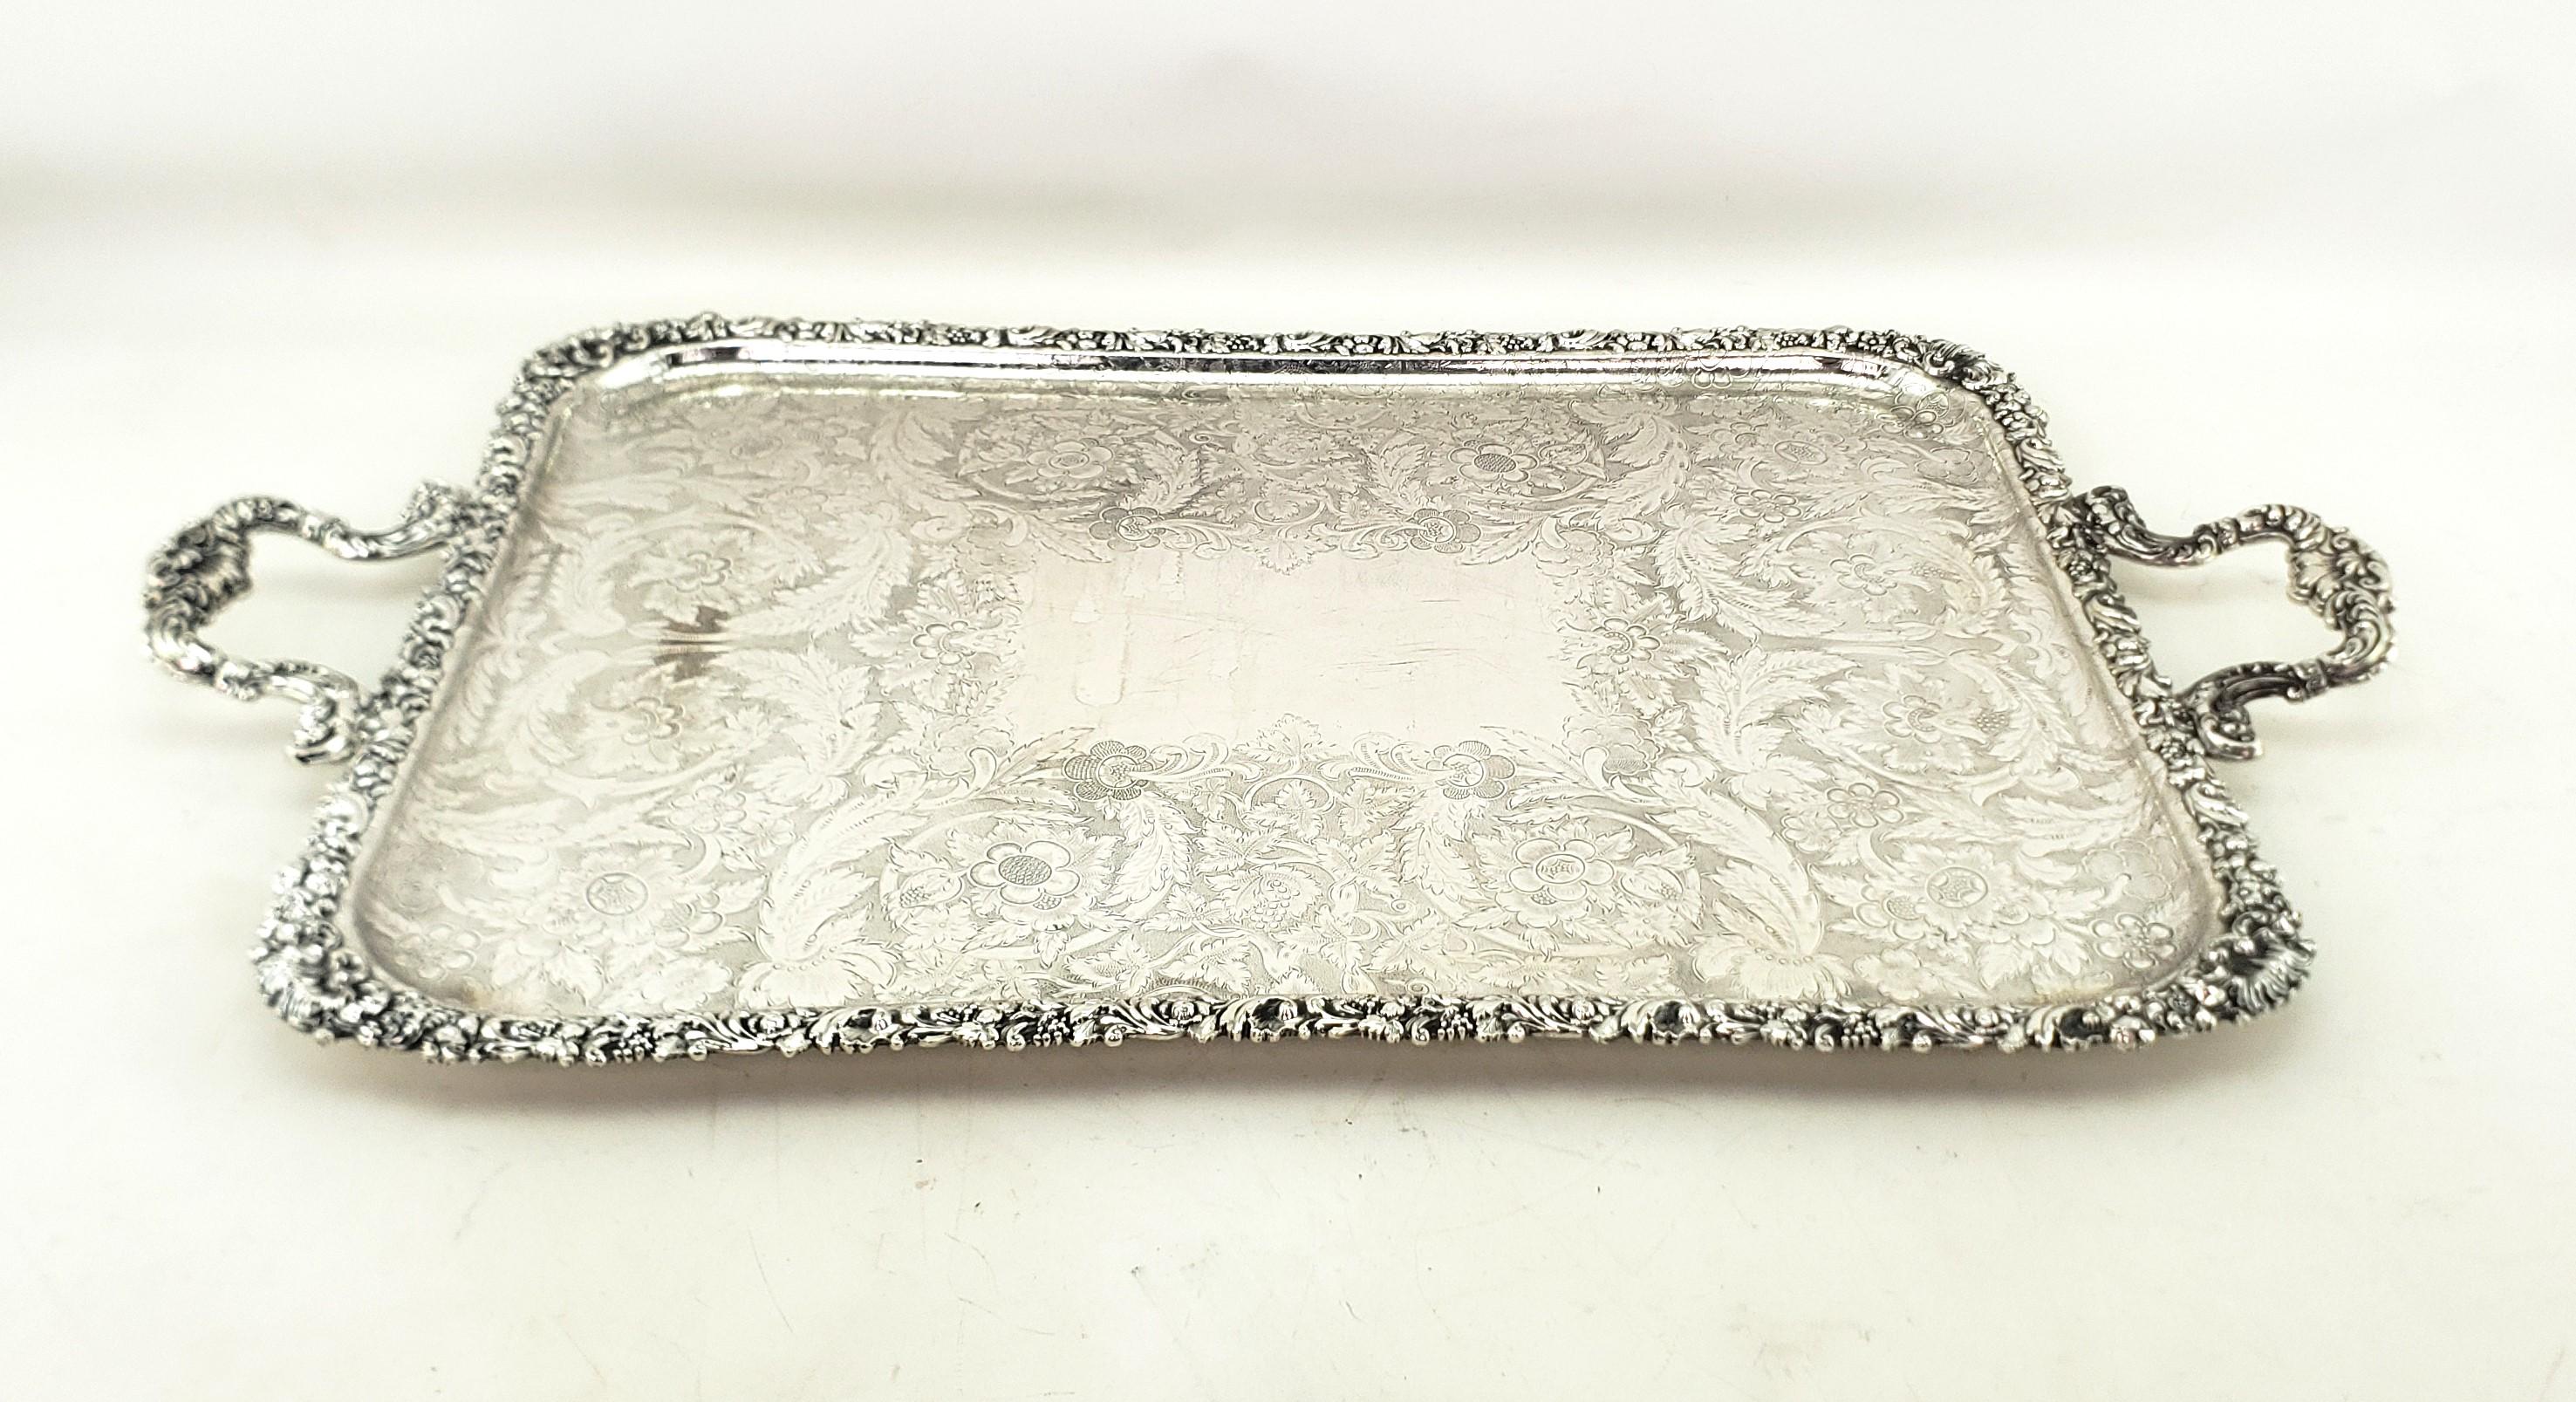 This very large and substantial antique serving tray was produced for the renowned Birks retailers by an unknown maker from England and dates to approximately 1880 and done in the period Victorian style. The tray is composed of Birks signature